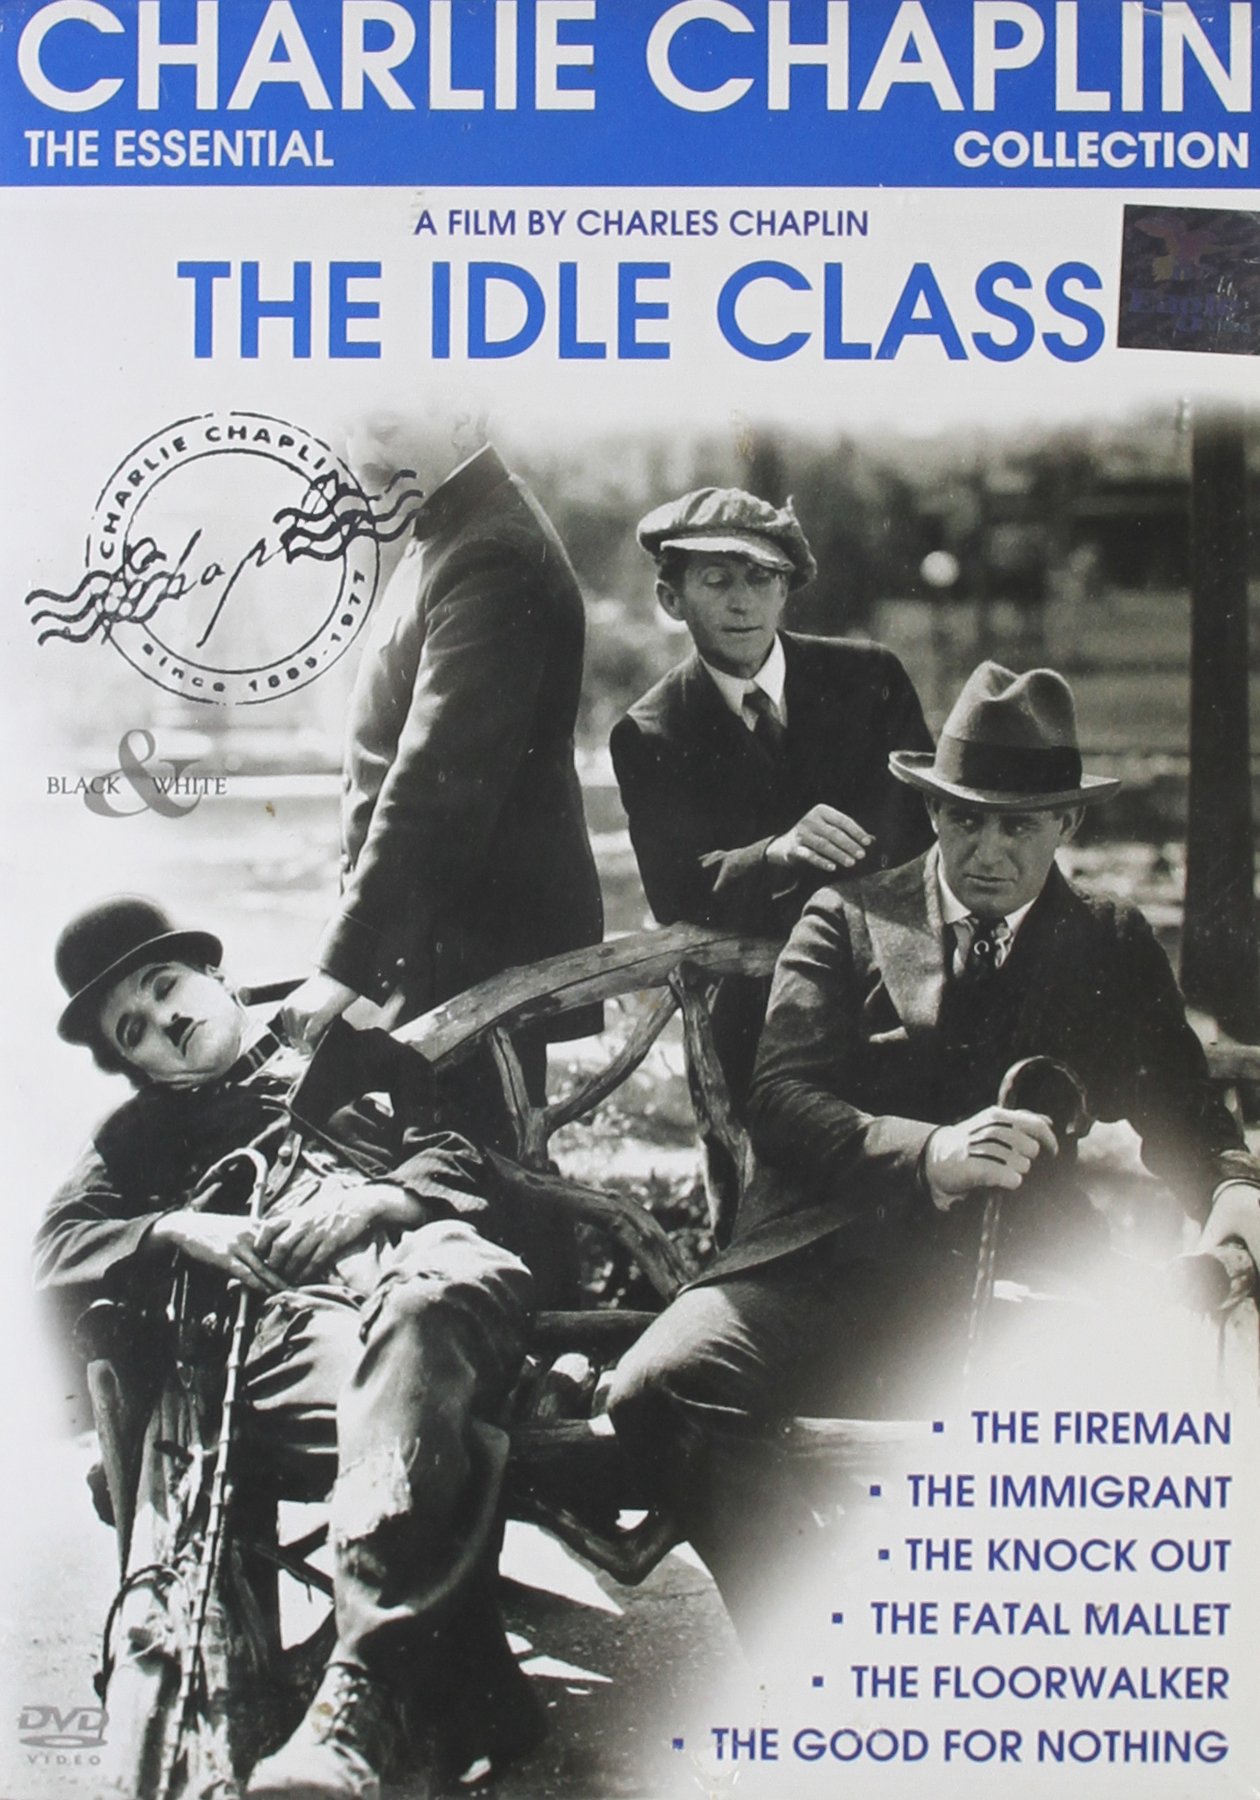 charlie-chaplin-collection-the-idle-class-movie-purchase-or-watch-on